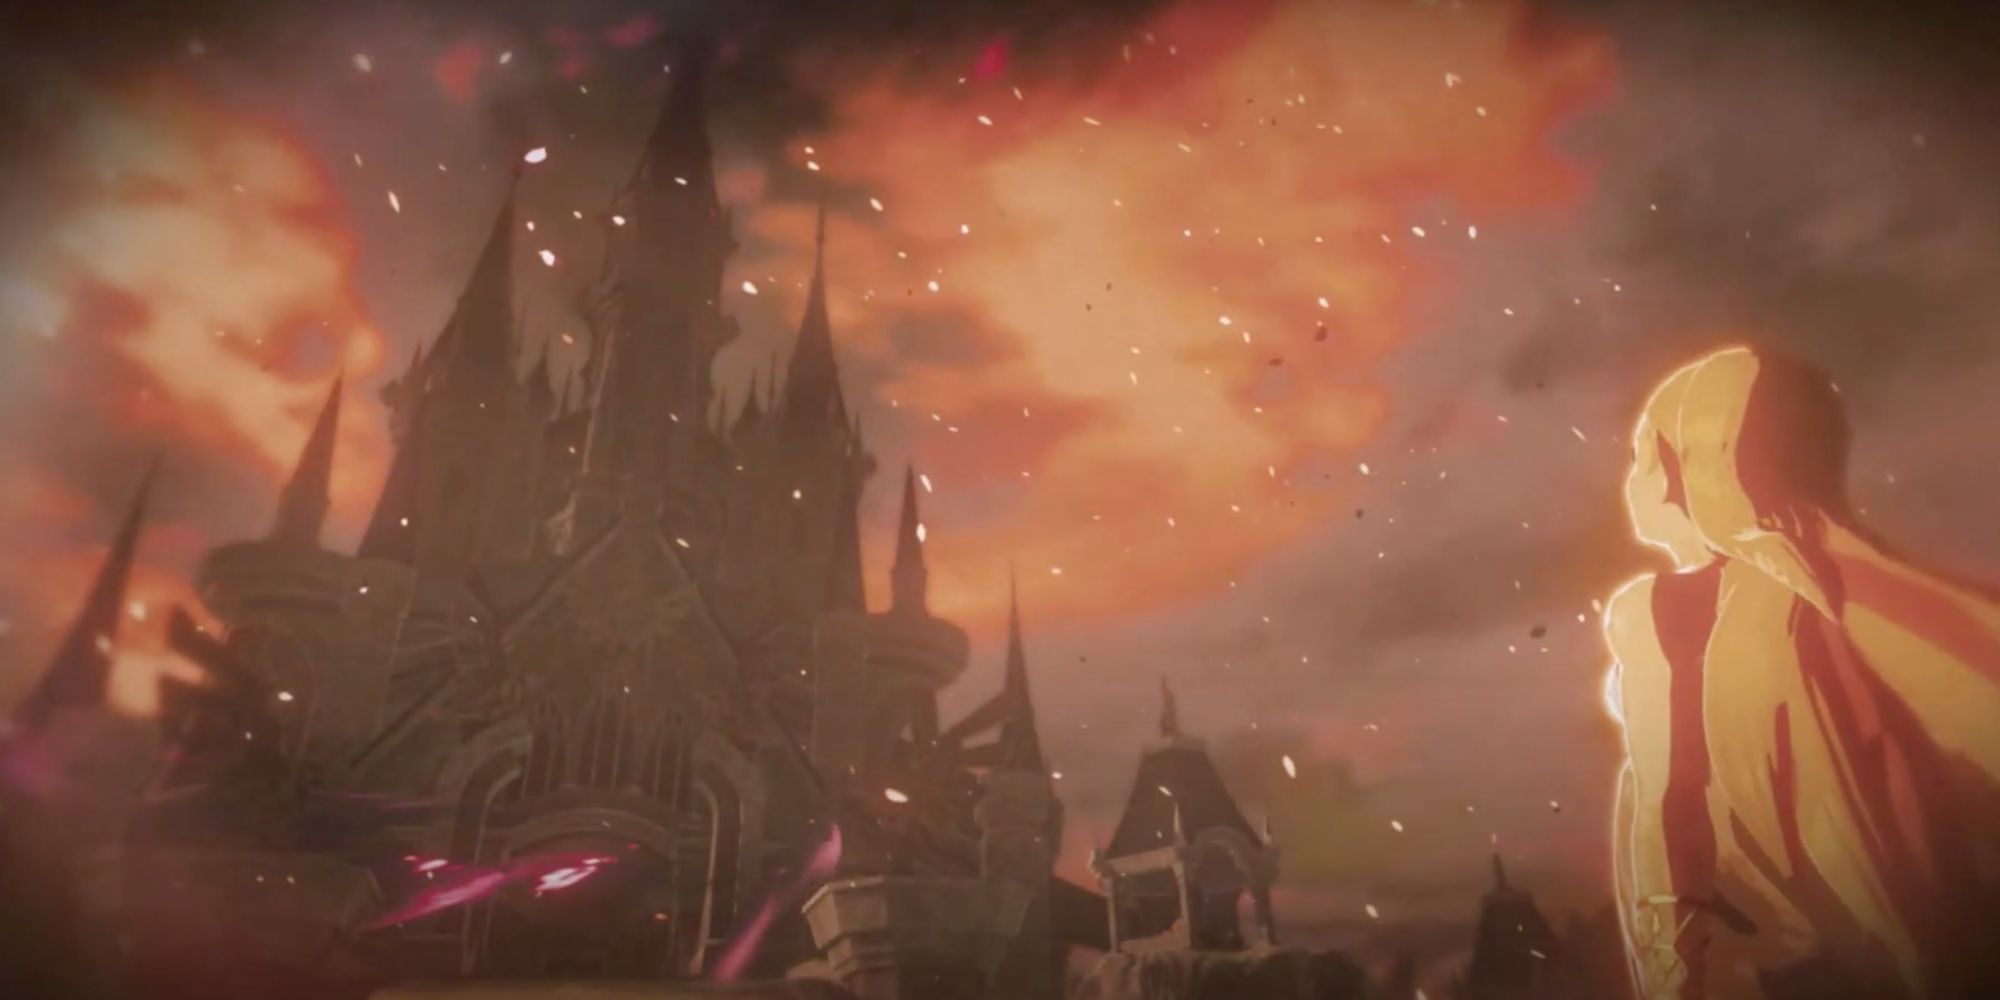 Breath of the Wild's Hyrule Castle gets taken over by Calamity Ganon 100 years before the game begins